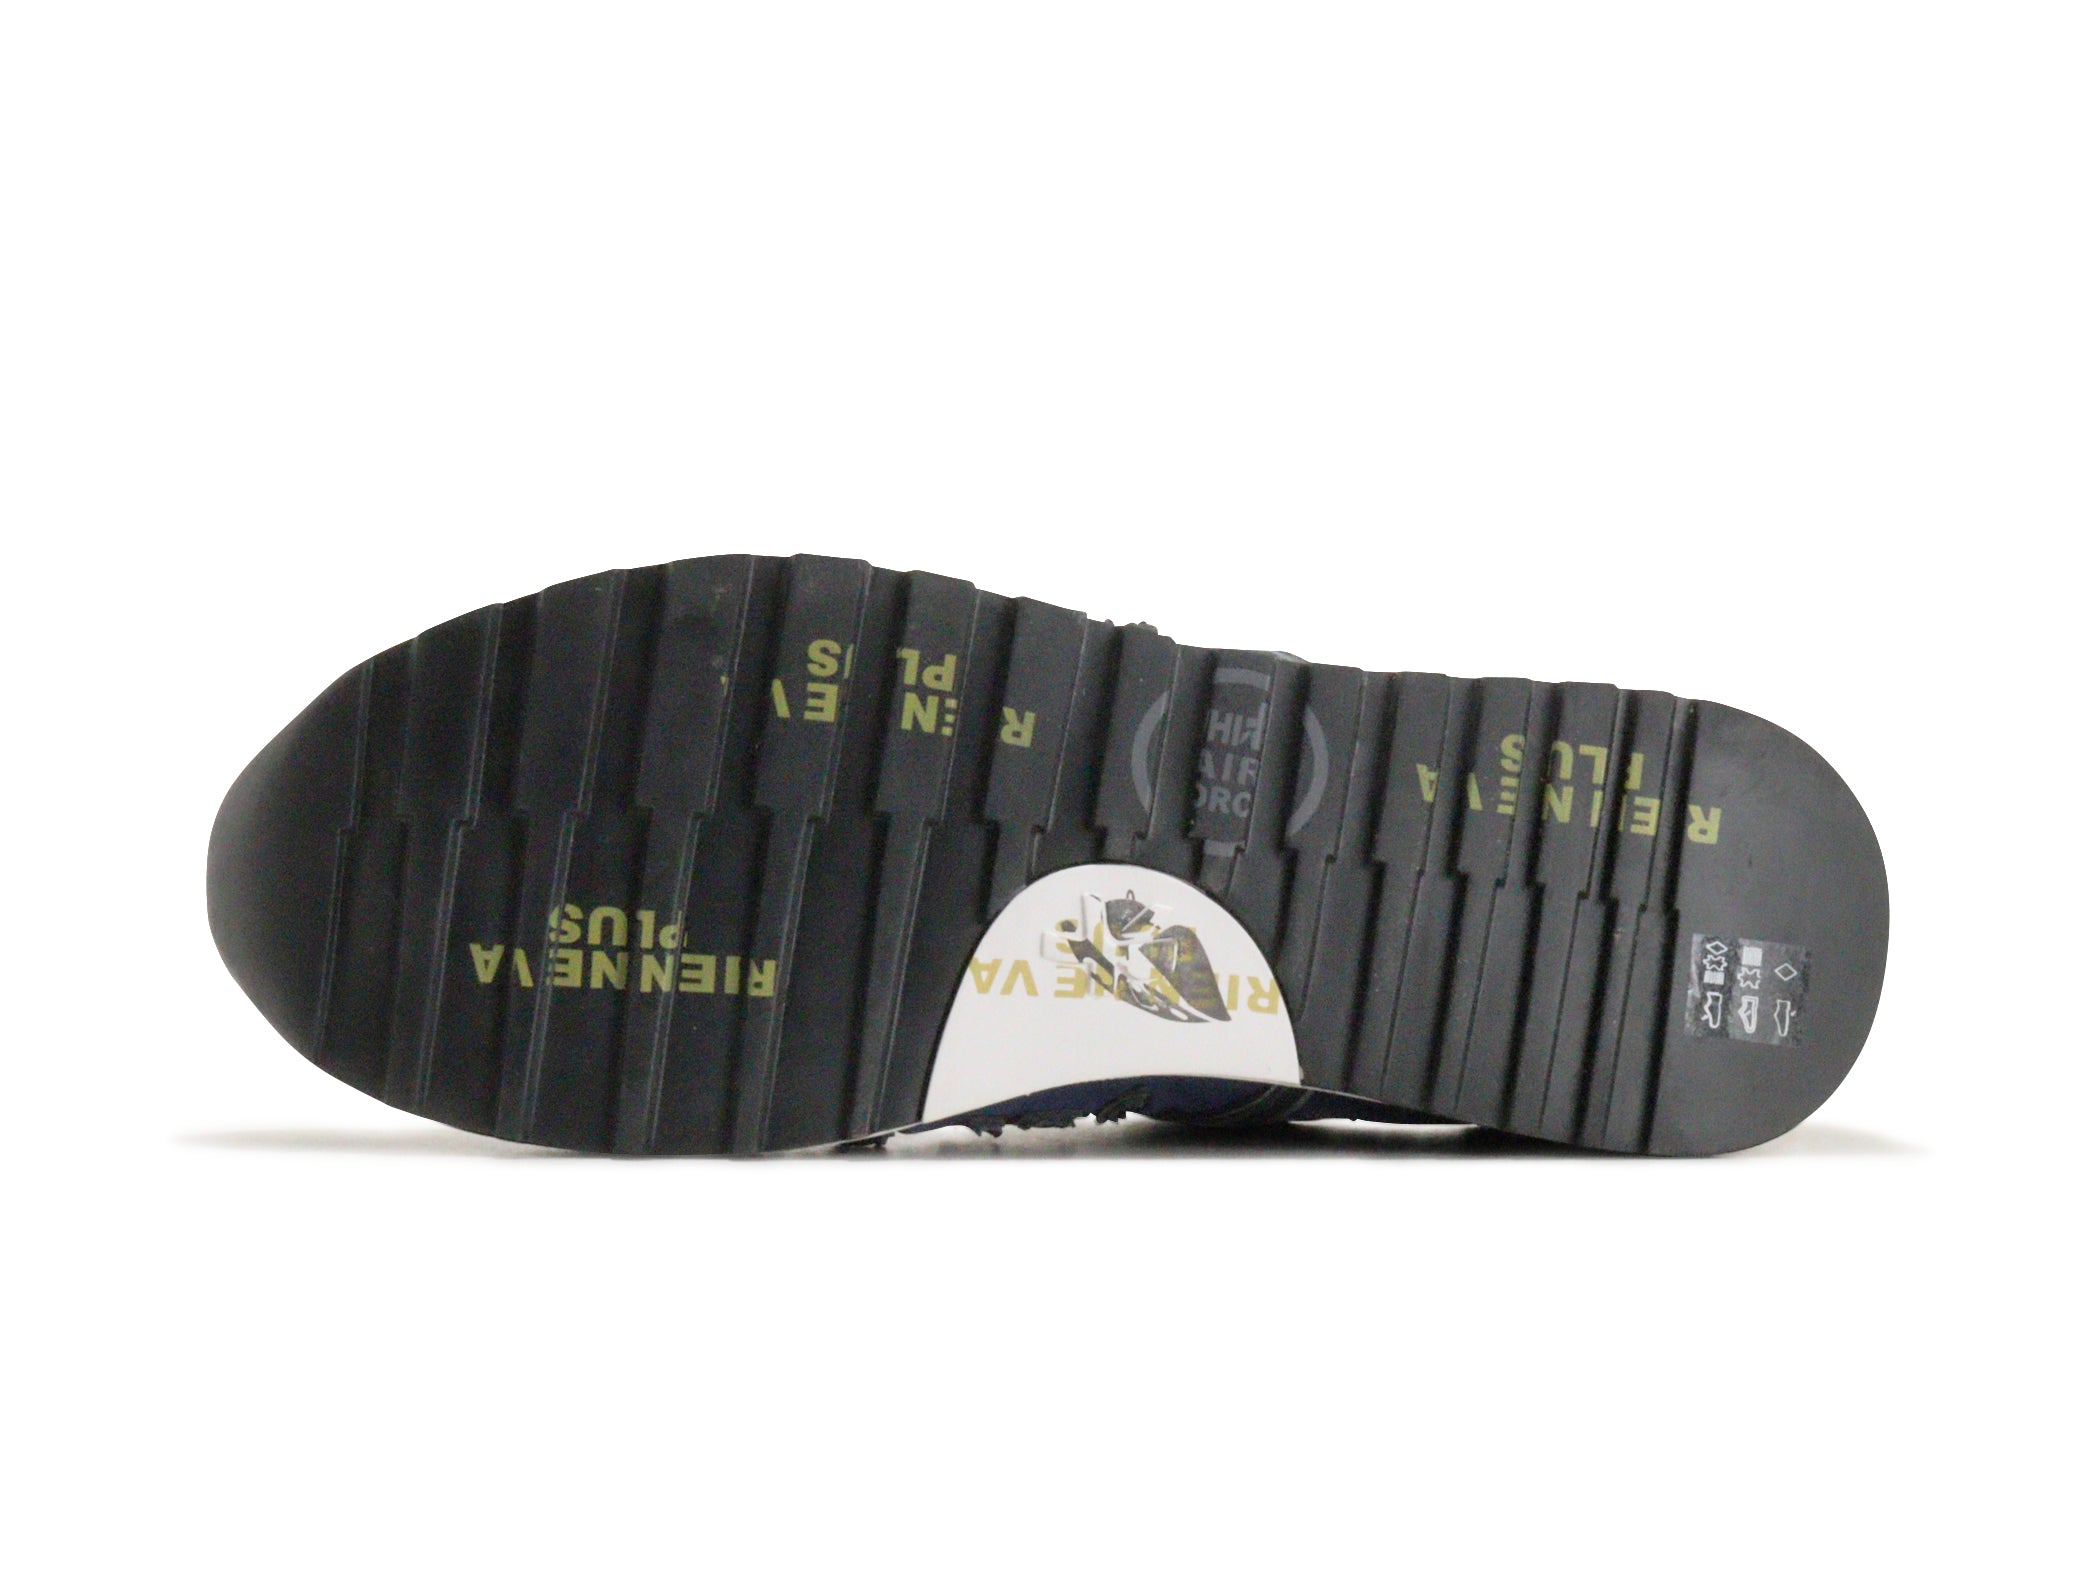 PREMIATA (プレミアータ) 3815 LUCY ブルー | GLOBAL SHOES GALLERY ...